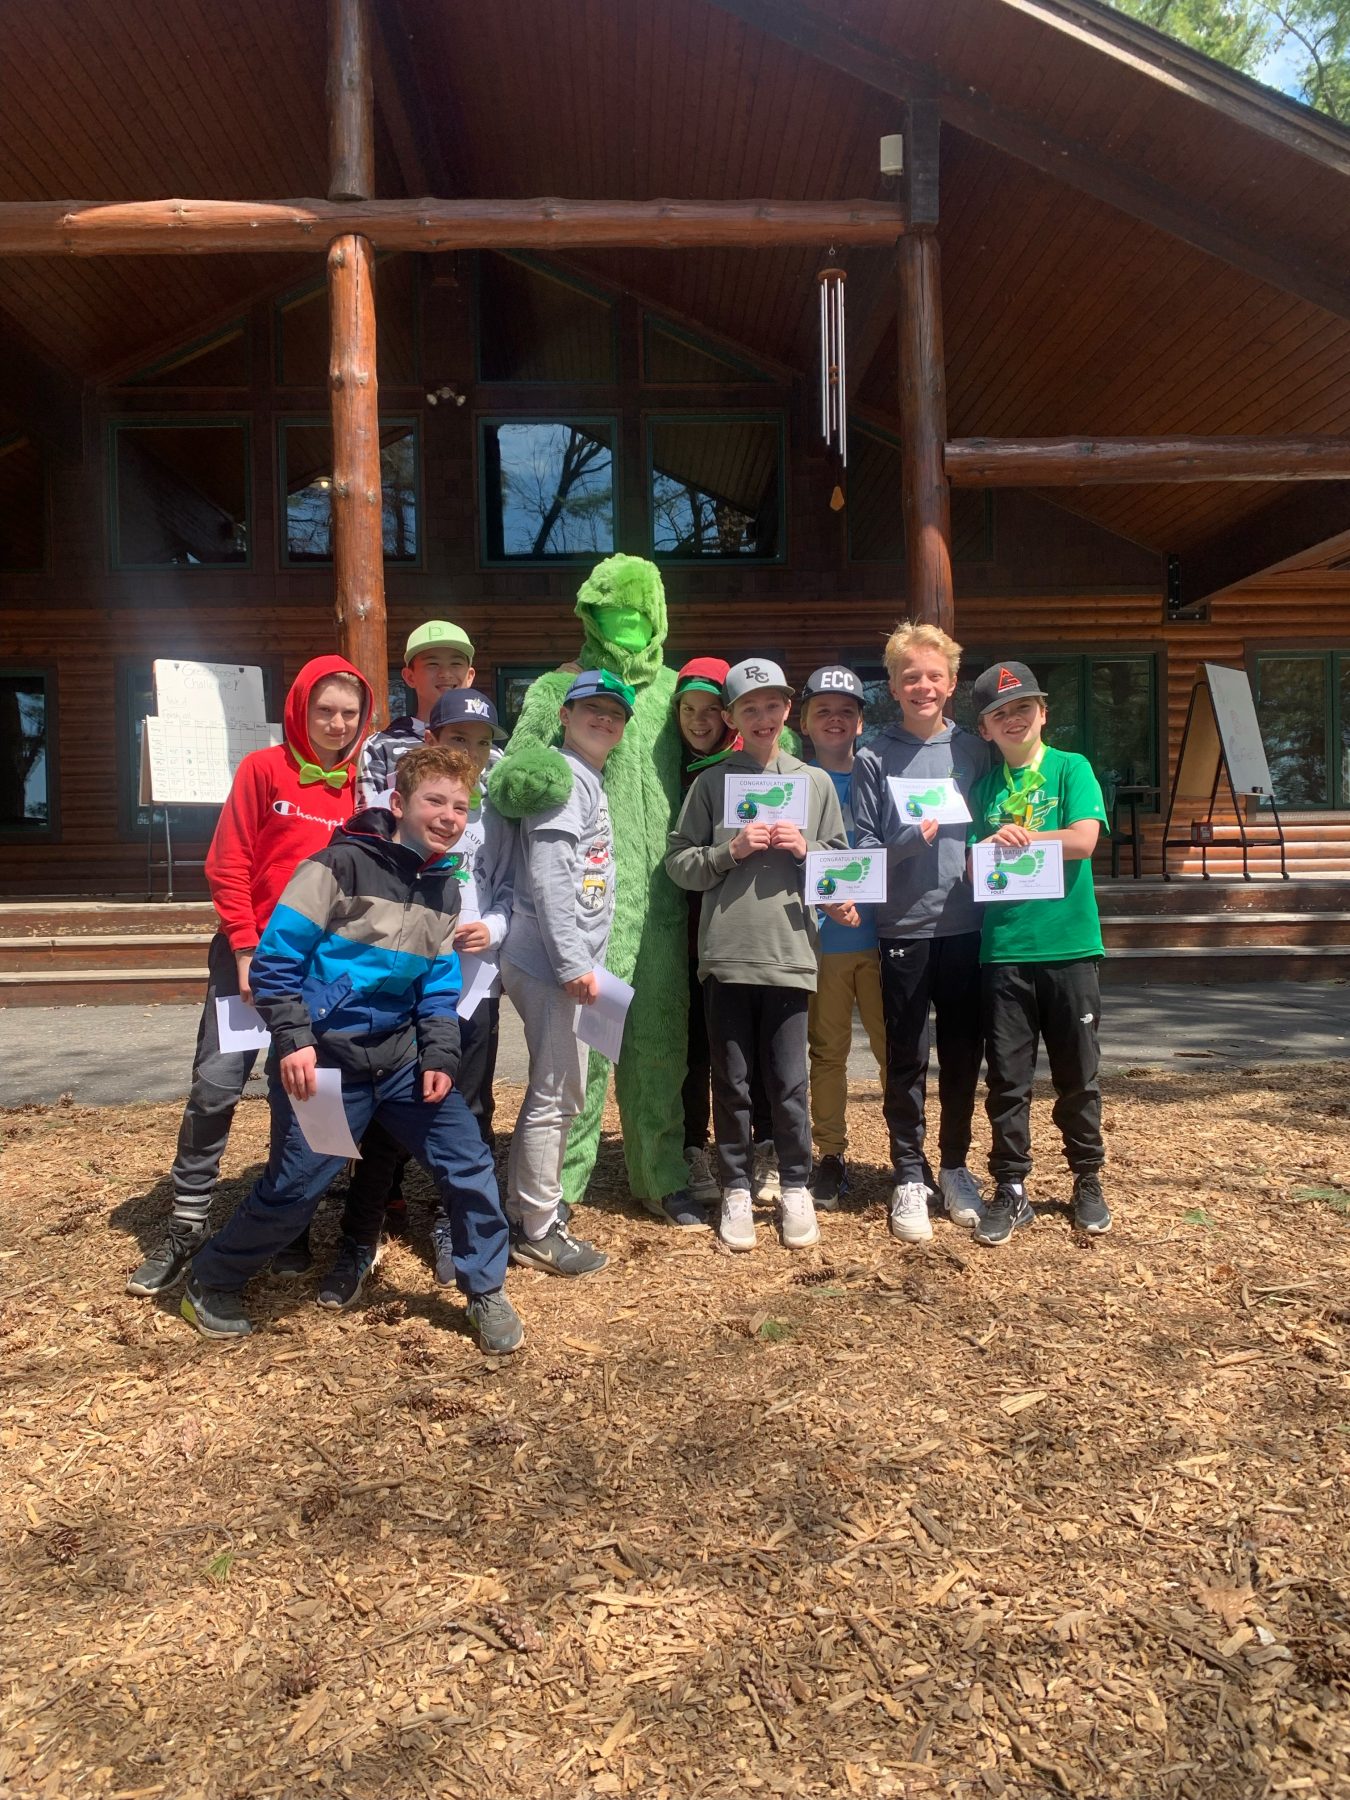 Kids stand around a camp counselor dressed as a fuzzy green monster, kids are smiling and holding certificates 